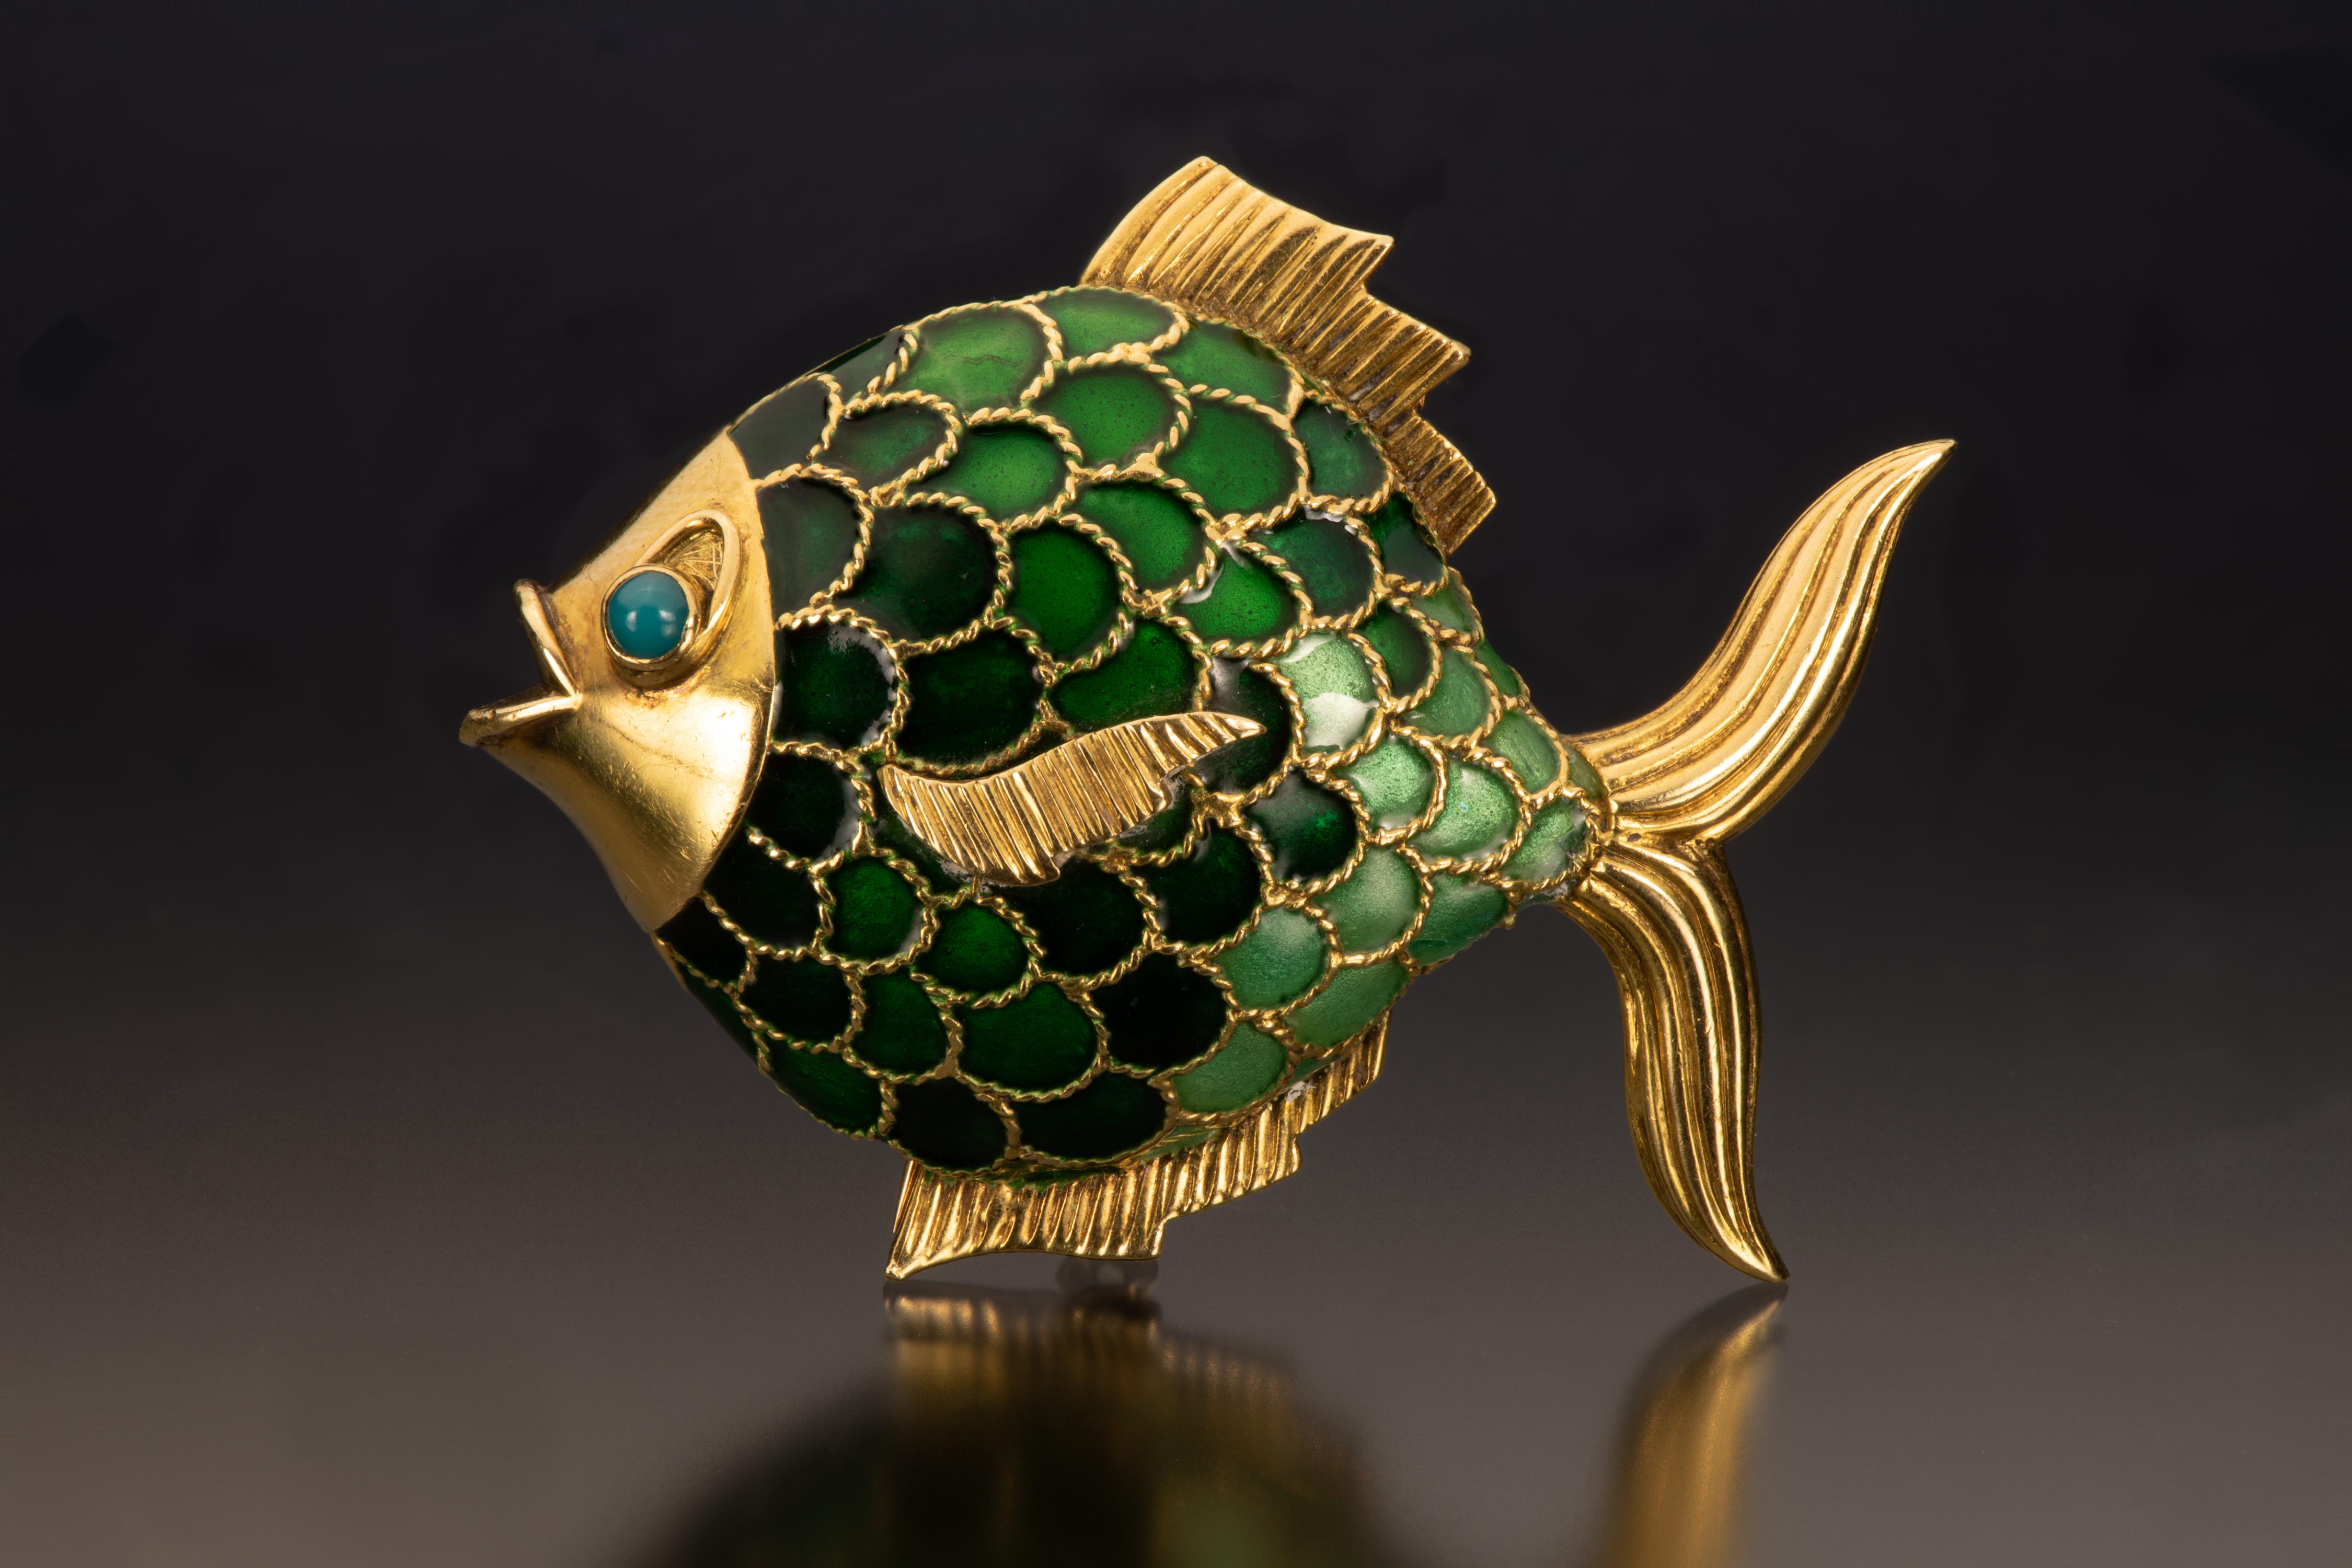 This vintage gold and enamel fish brooch illustrates the playful side of Boucheron. Shades of green enamel form the scales, and the 18k gold head is set with a cabochon gemstone eye.


-      Length is 1.75 inches and width is 2.25 inches

-     